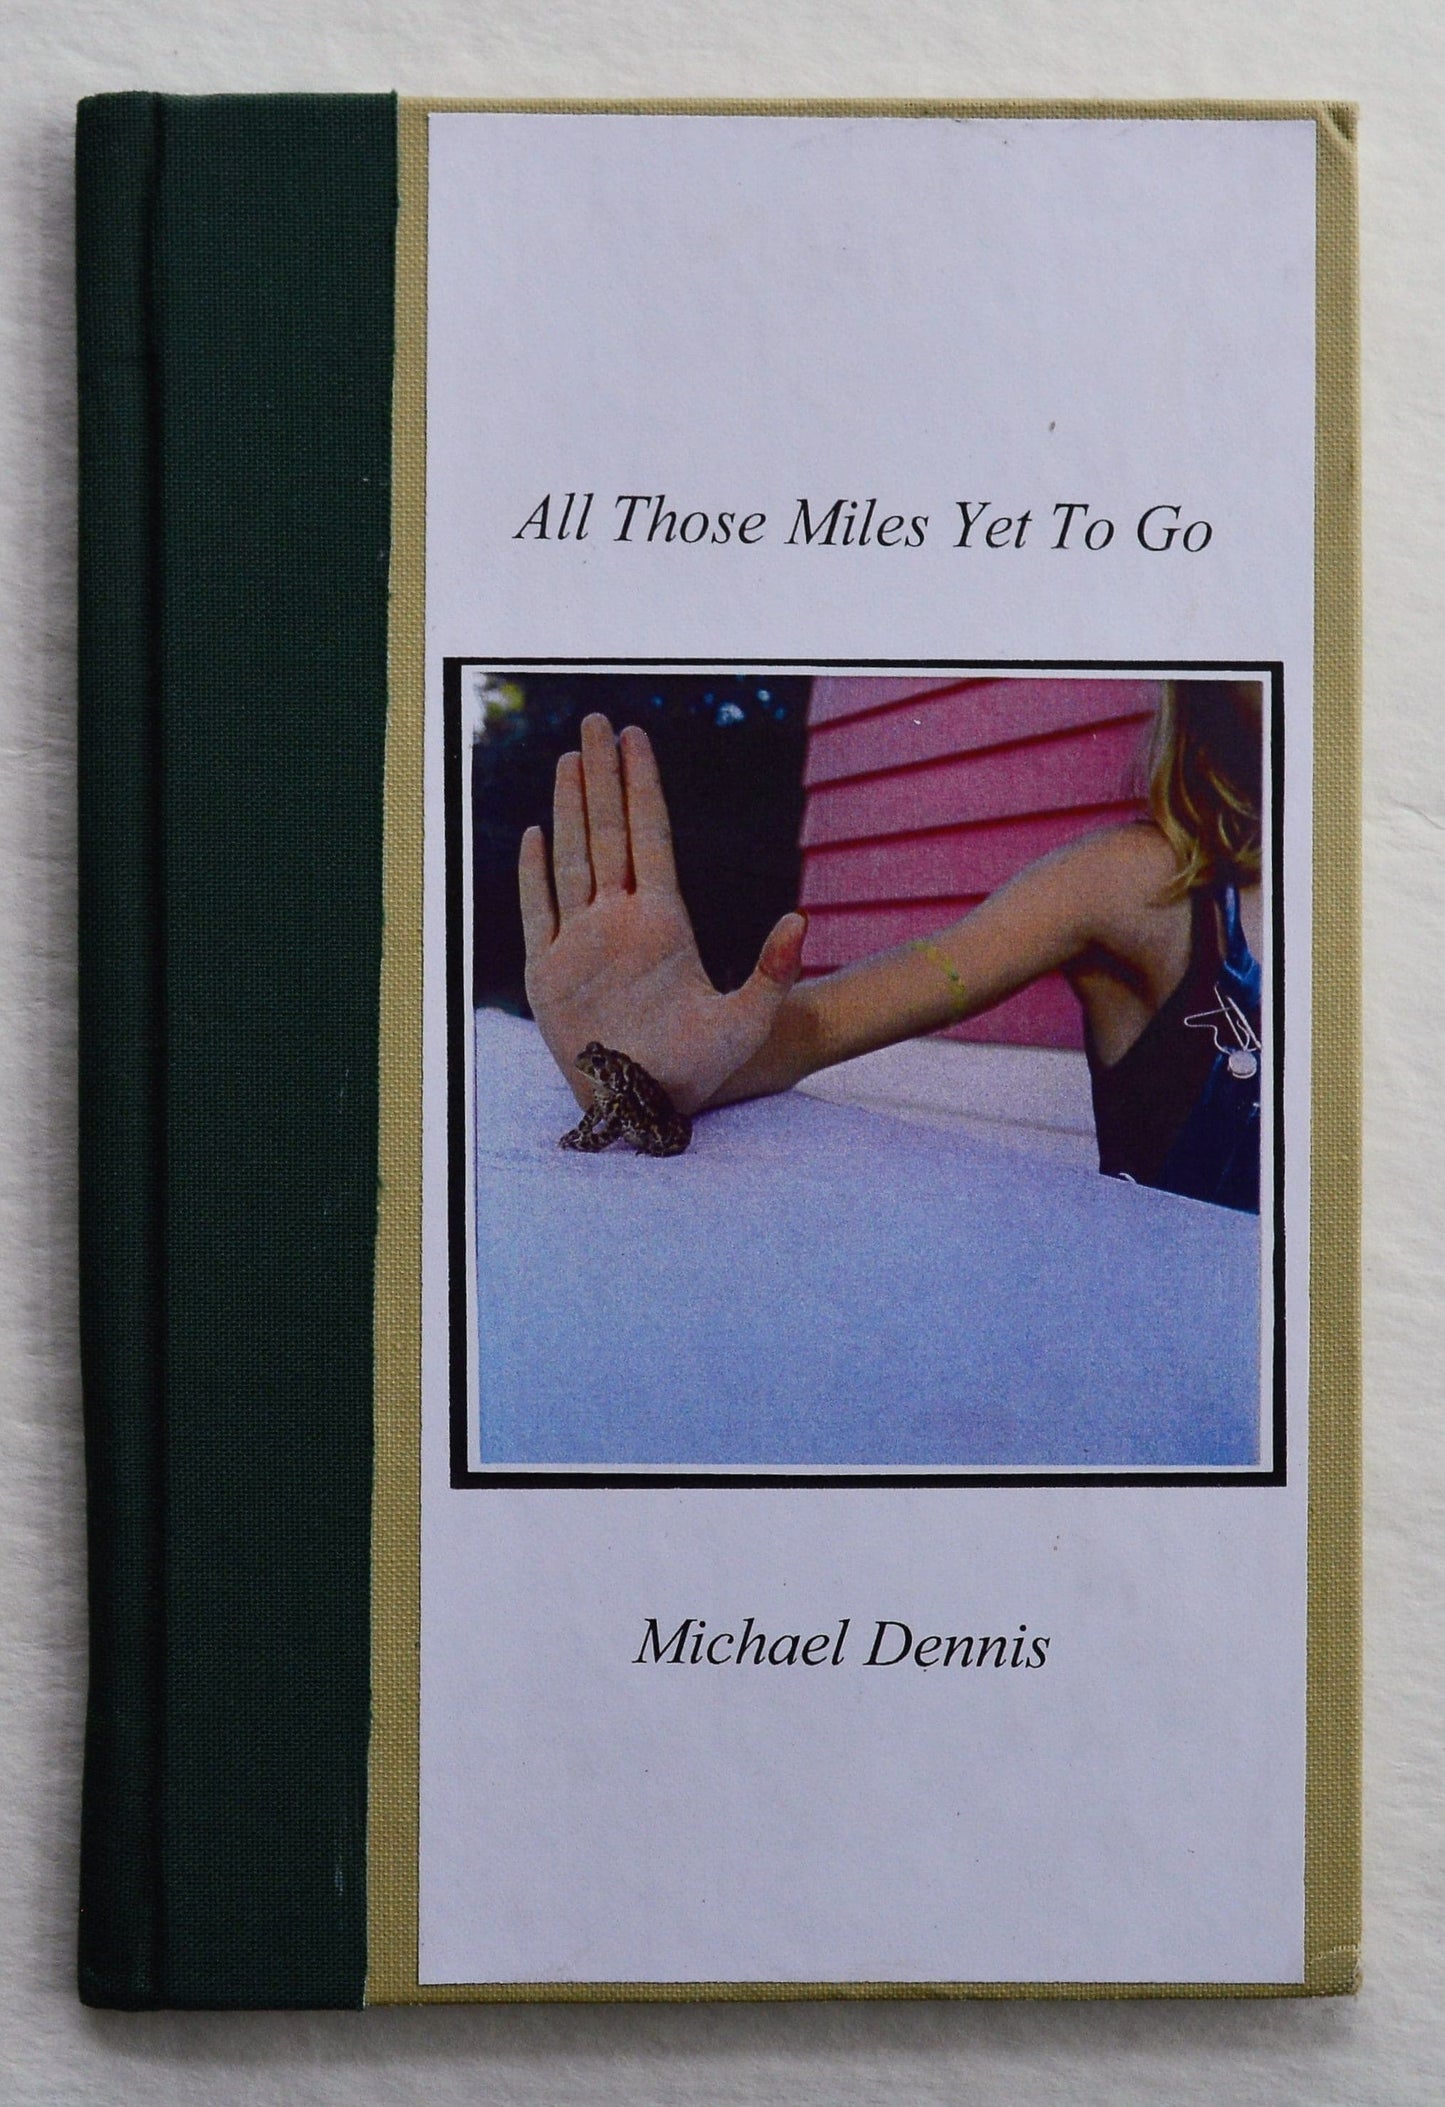 All Those Miles Yet To Go - Michael Dennis